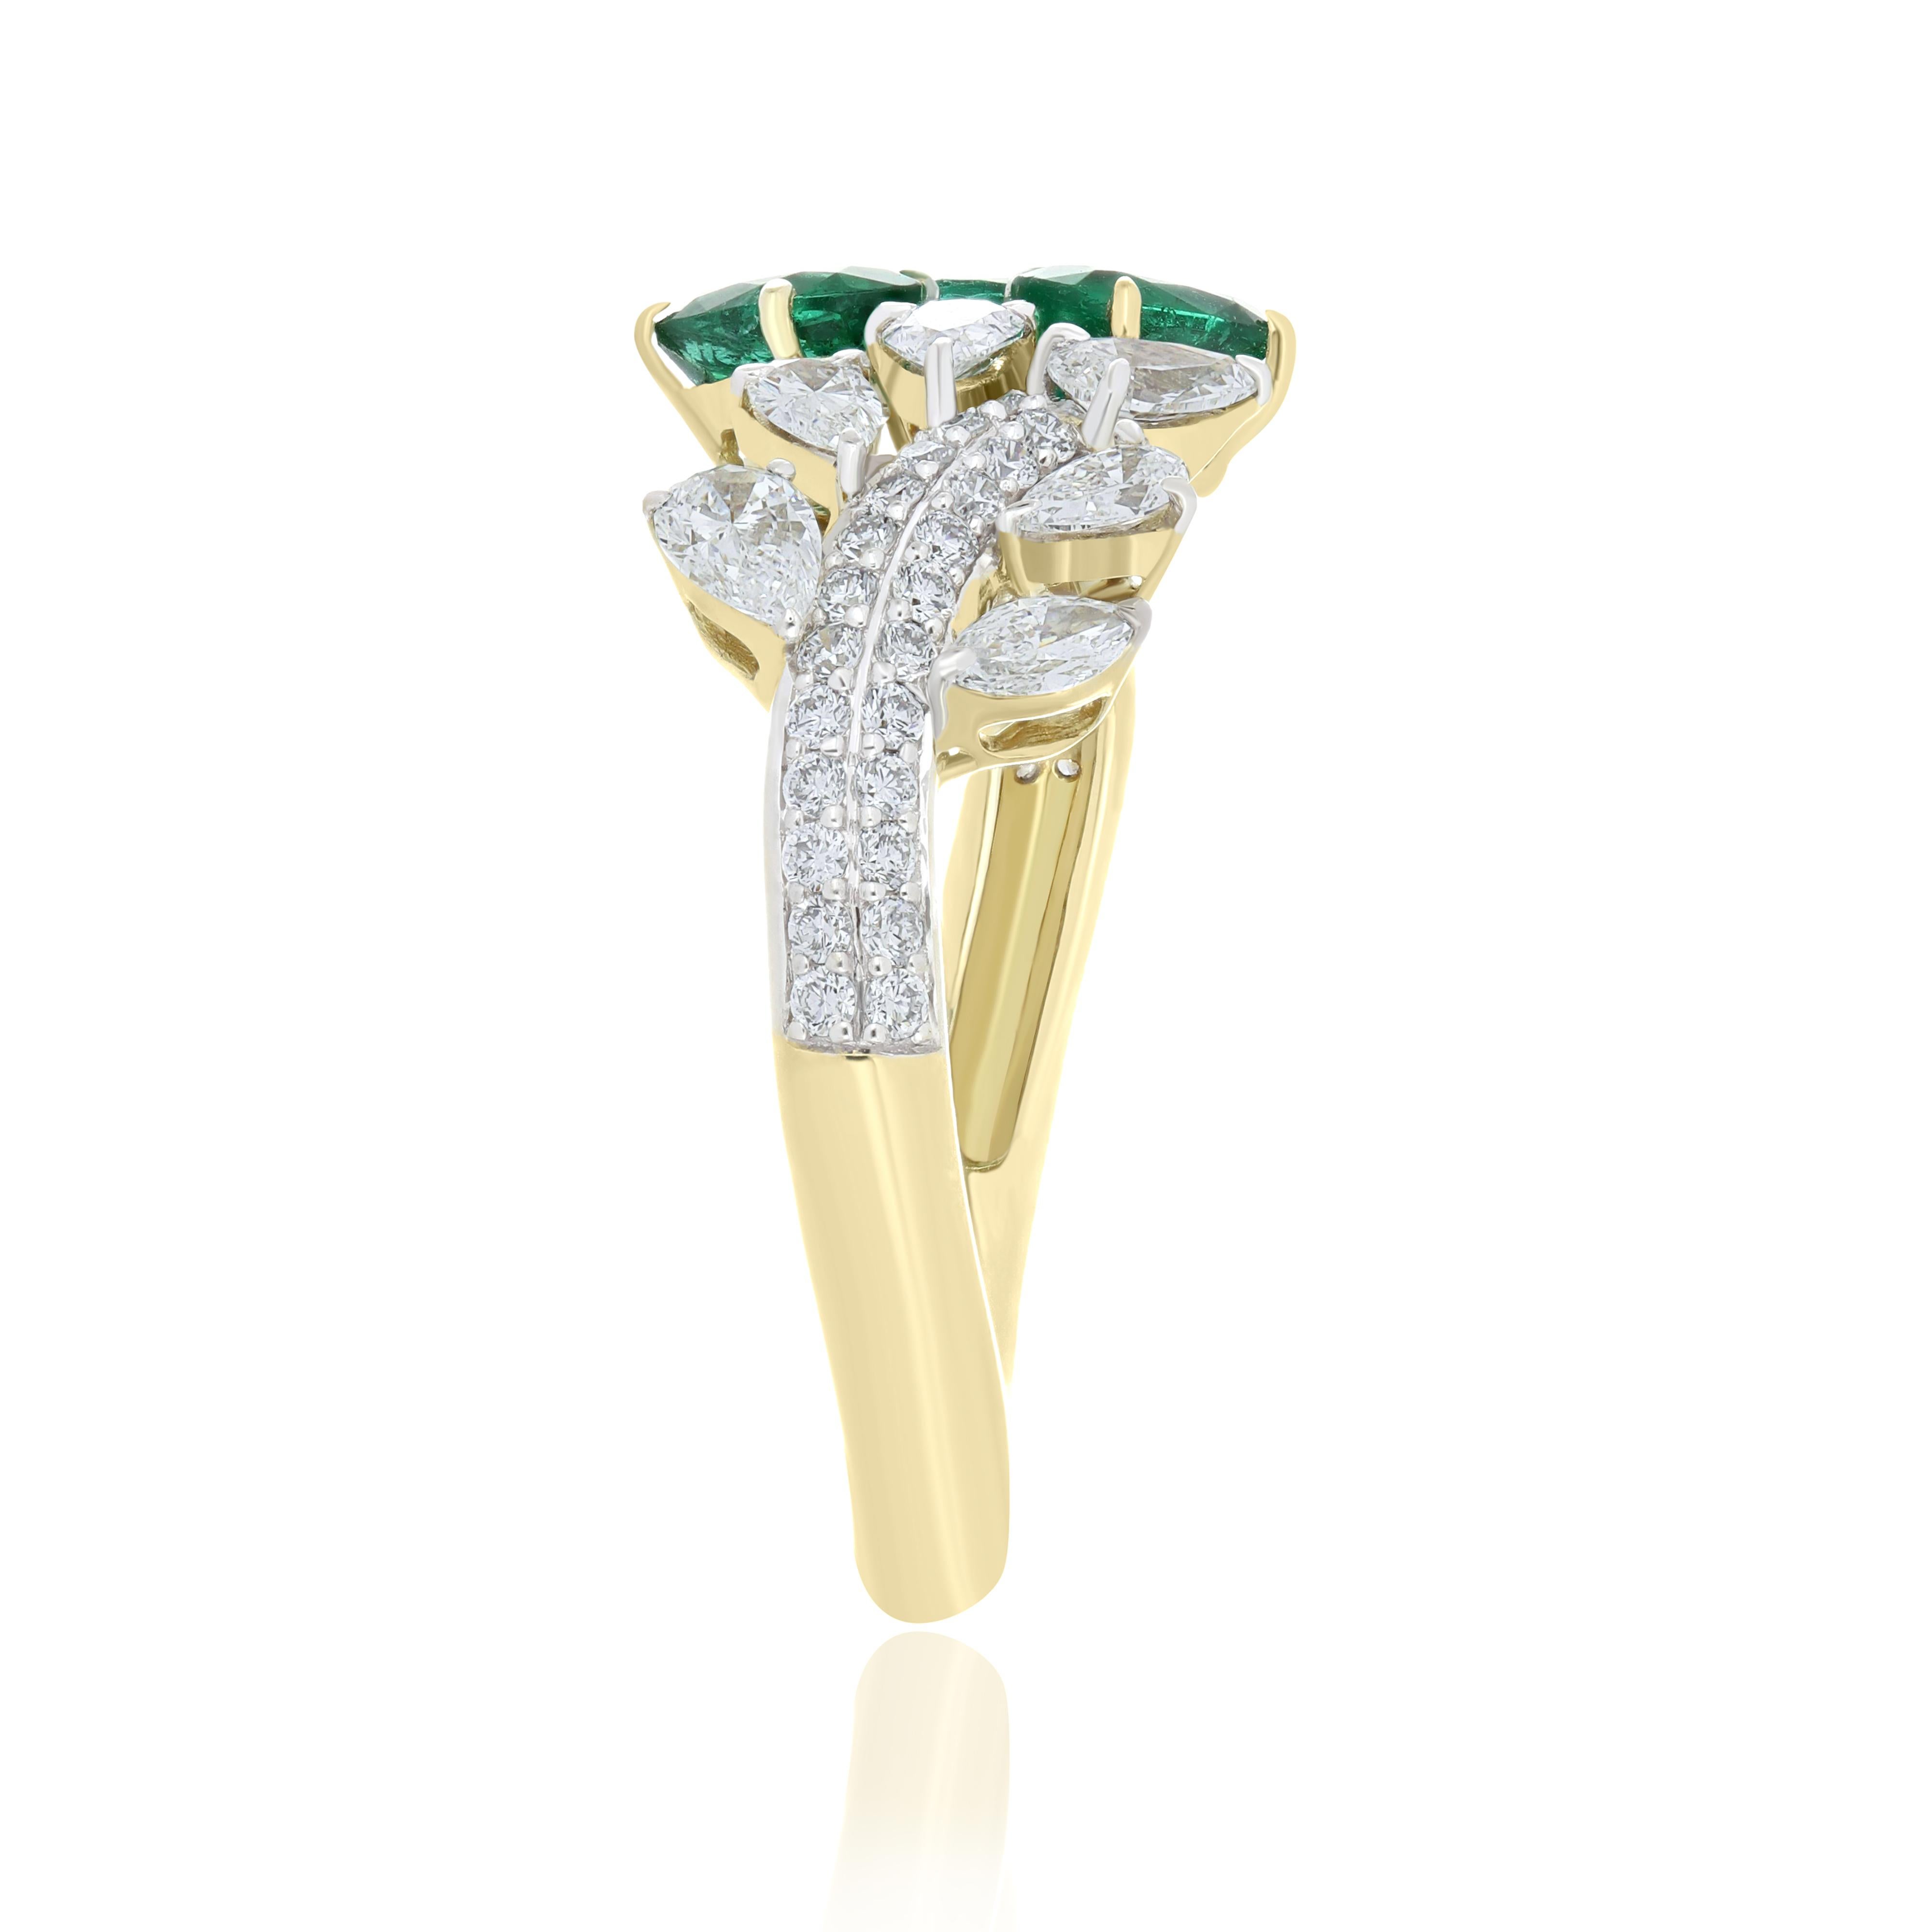 For Sale:  Emerald And Diamond Ring 18K White Gold handcraft Jewelry For Anniversary Gift 6